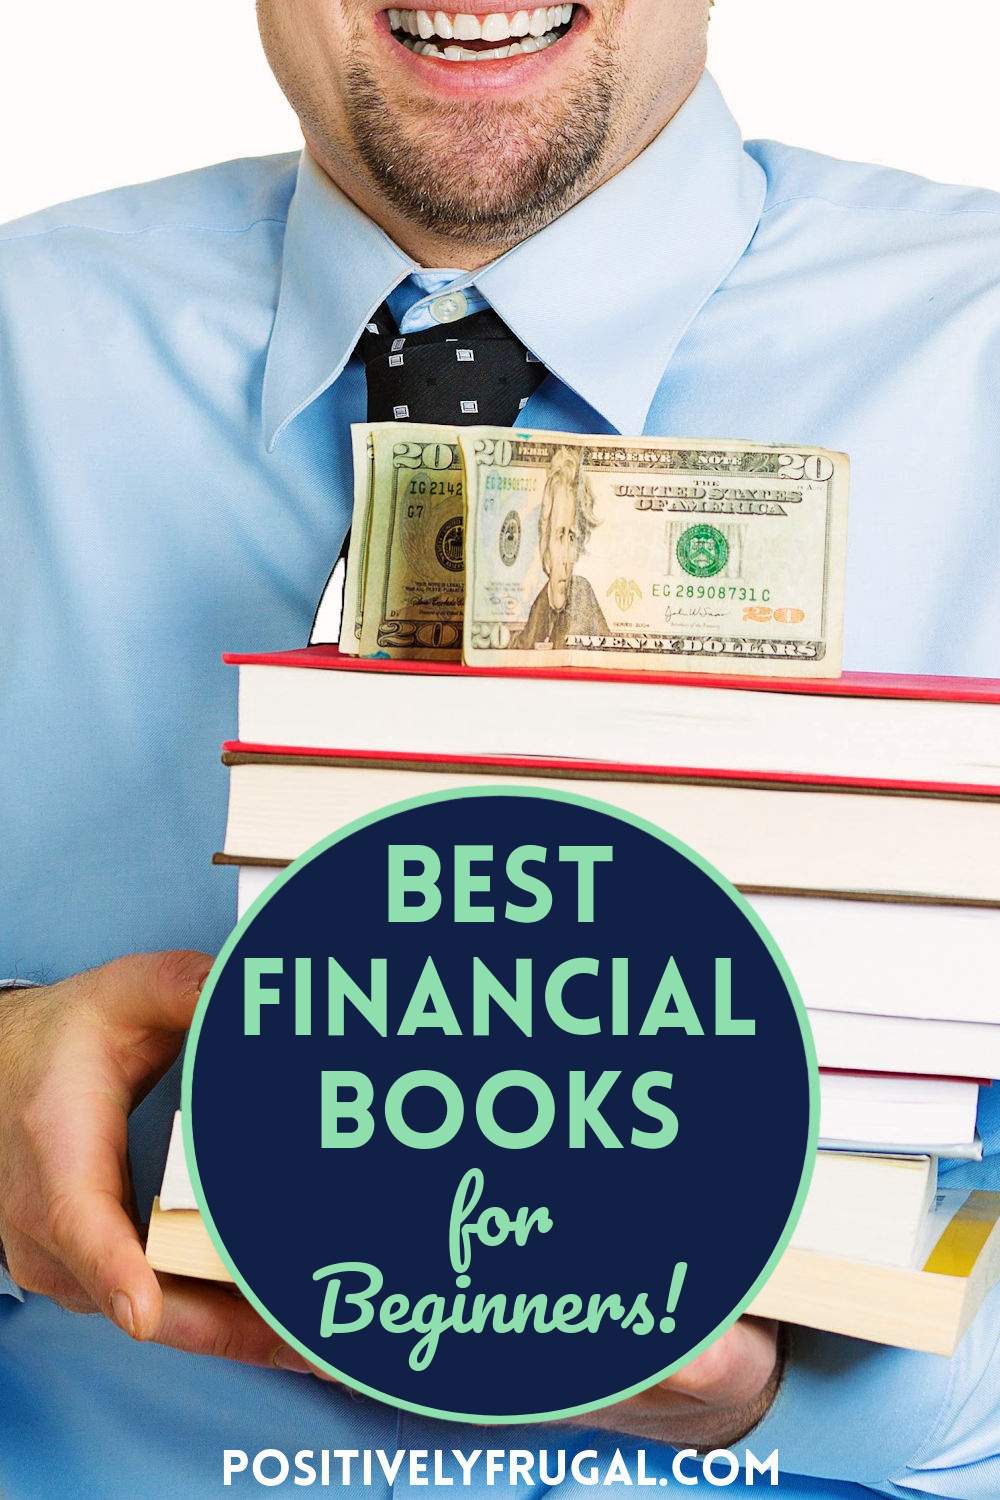 Best Financial Books for Beginners to Read by PositivelyFrugal.com